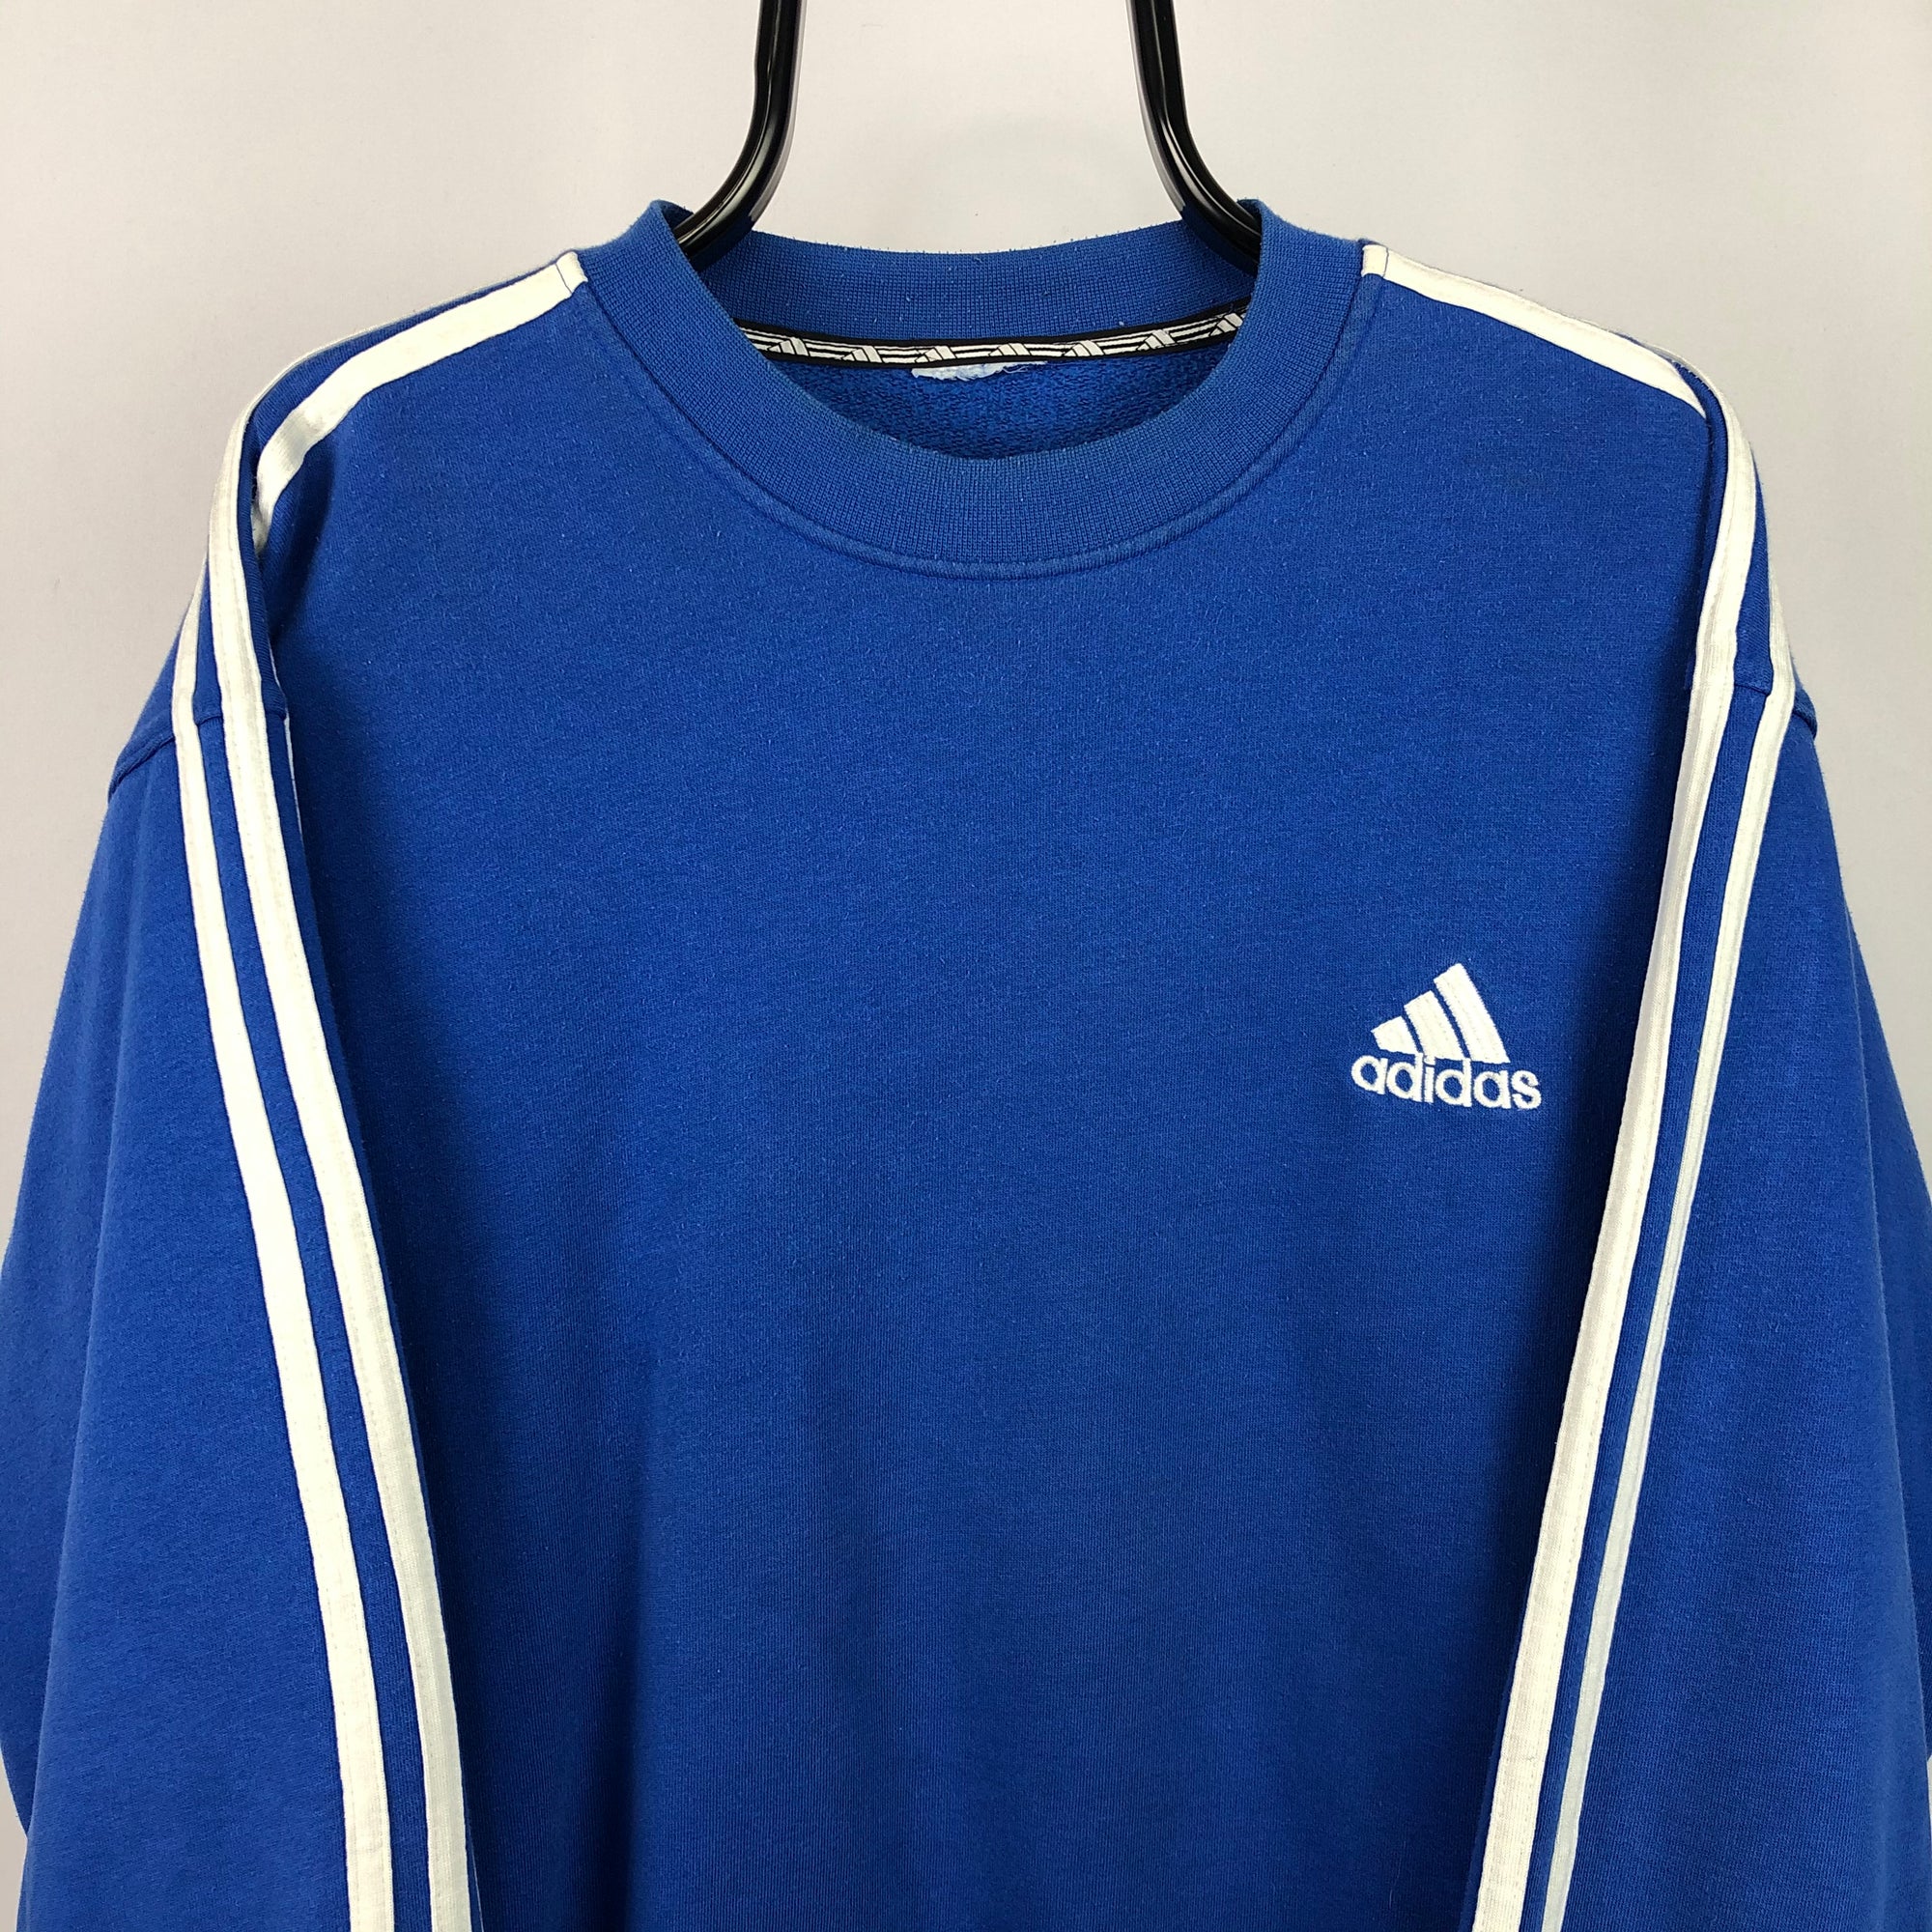 Vintage 90s Adidas Embroidered Small Logo Sweatshirt in Blue/White - Men's Large/Women's XL